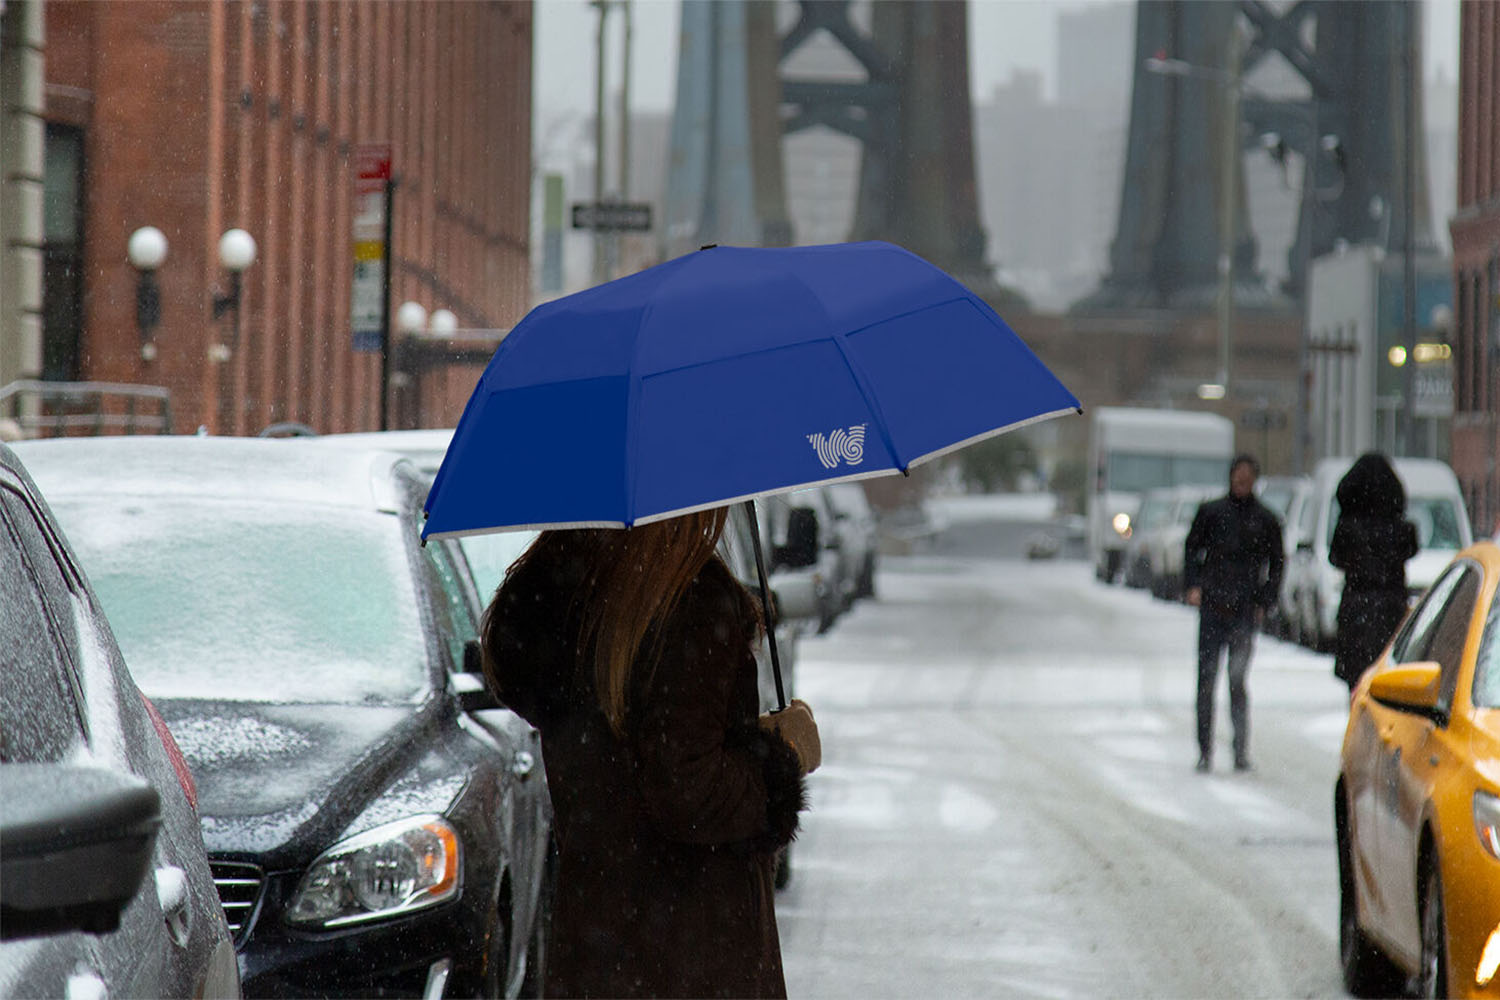 a woman carrying a cobalt blue umbrella in a snowy urban scape 